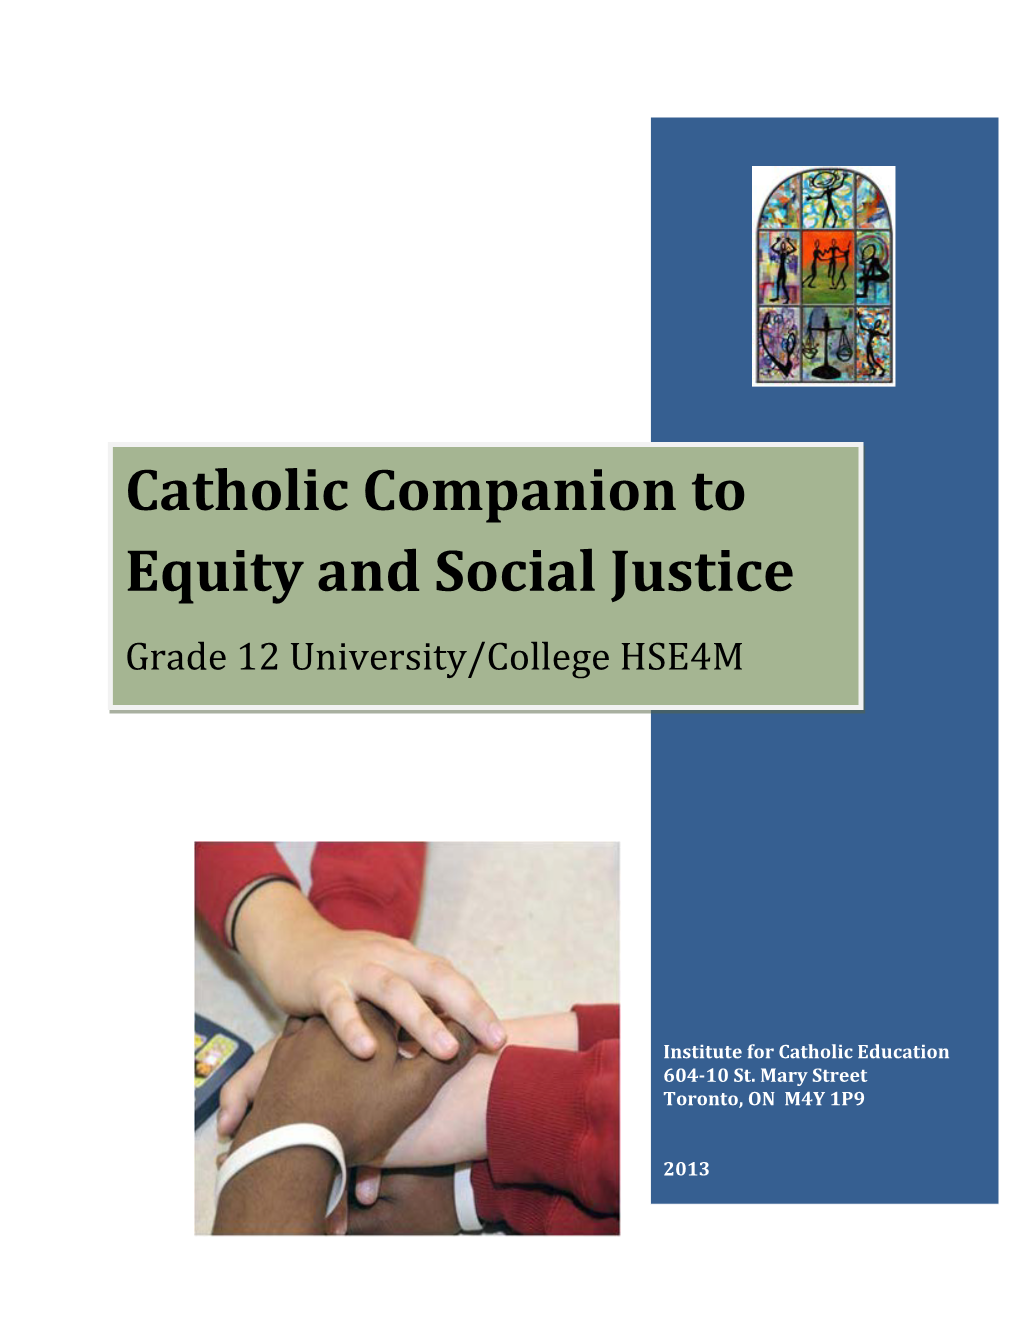 Catholic Companion to Equity and Social Justice